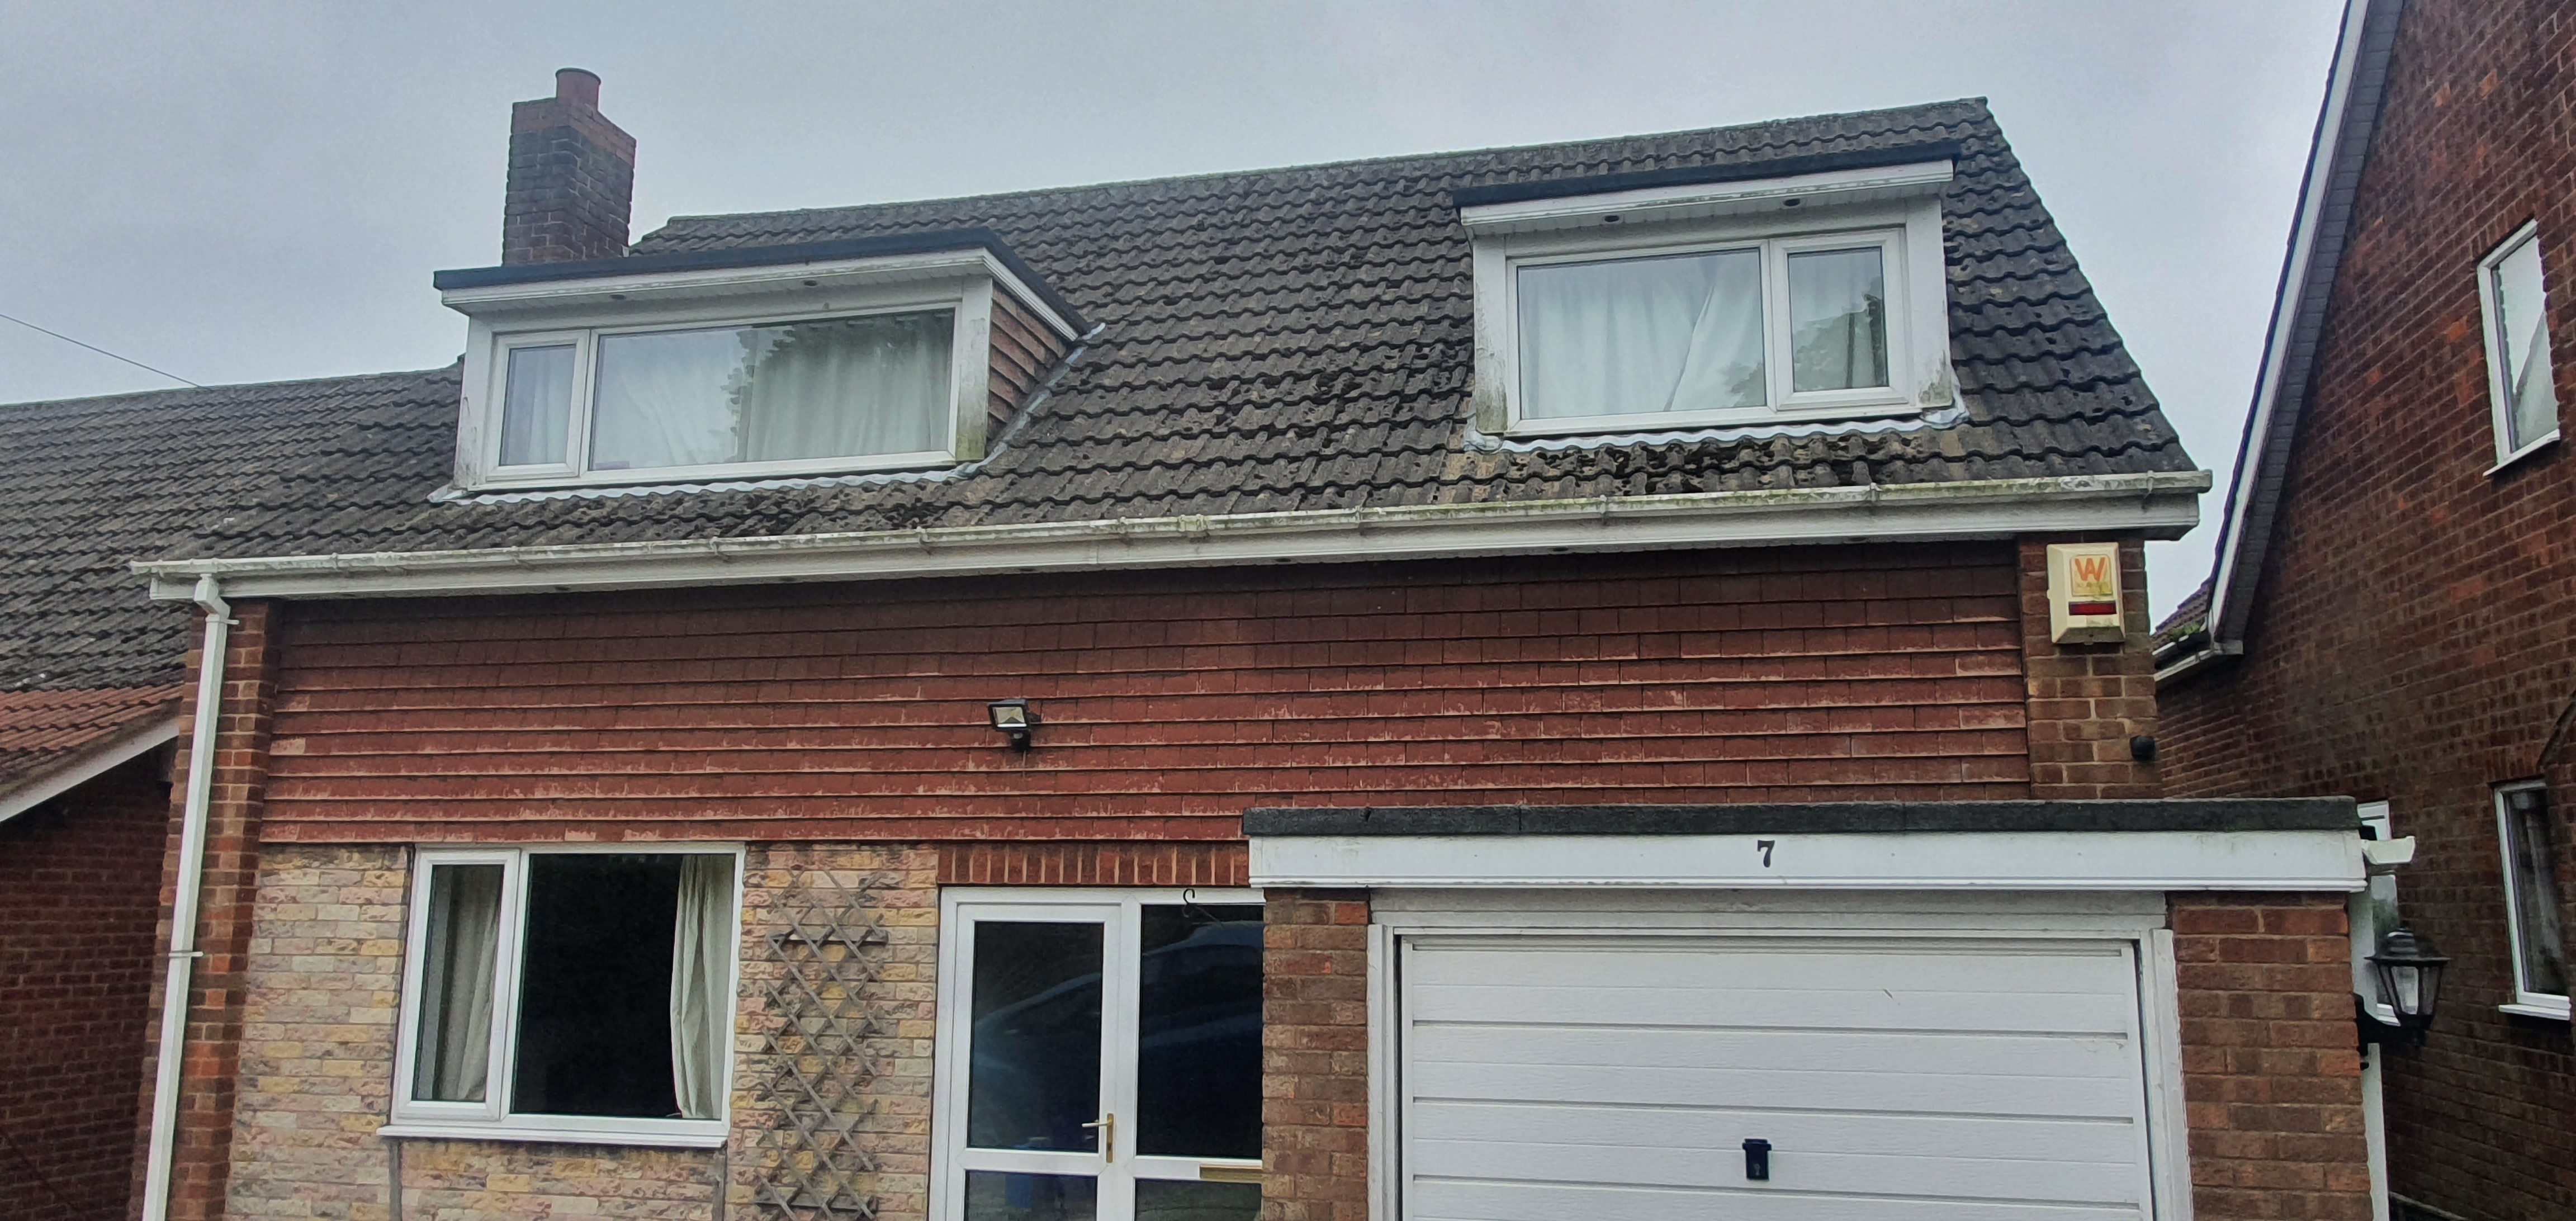 Gutter Cleaning Scunthorpe, Upvc cleaning